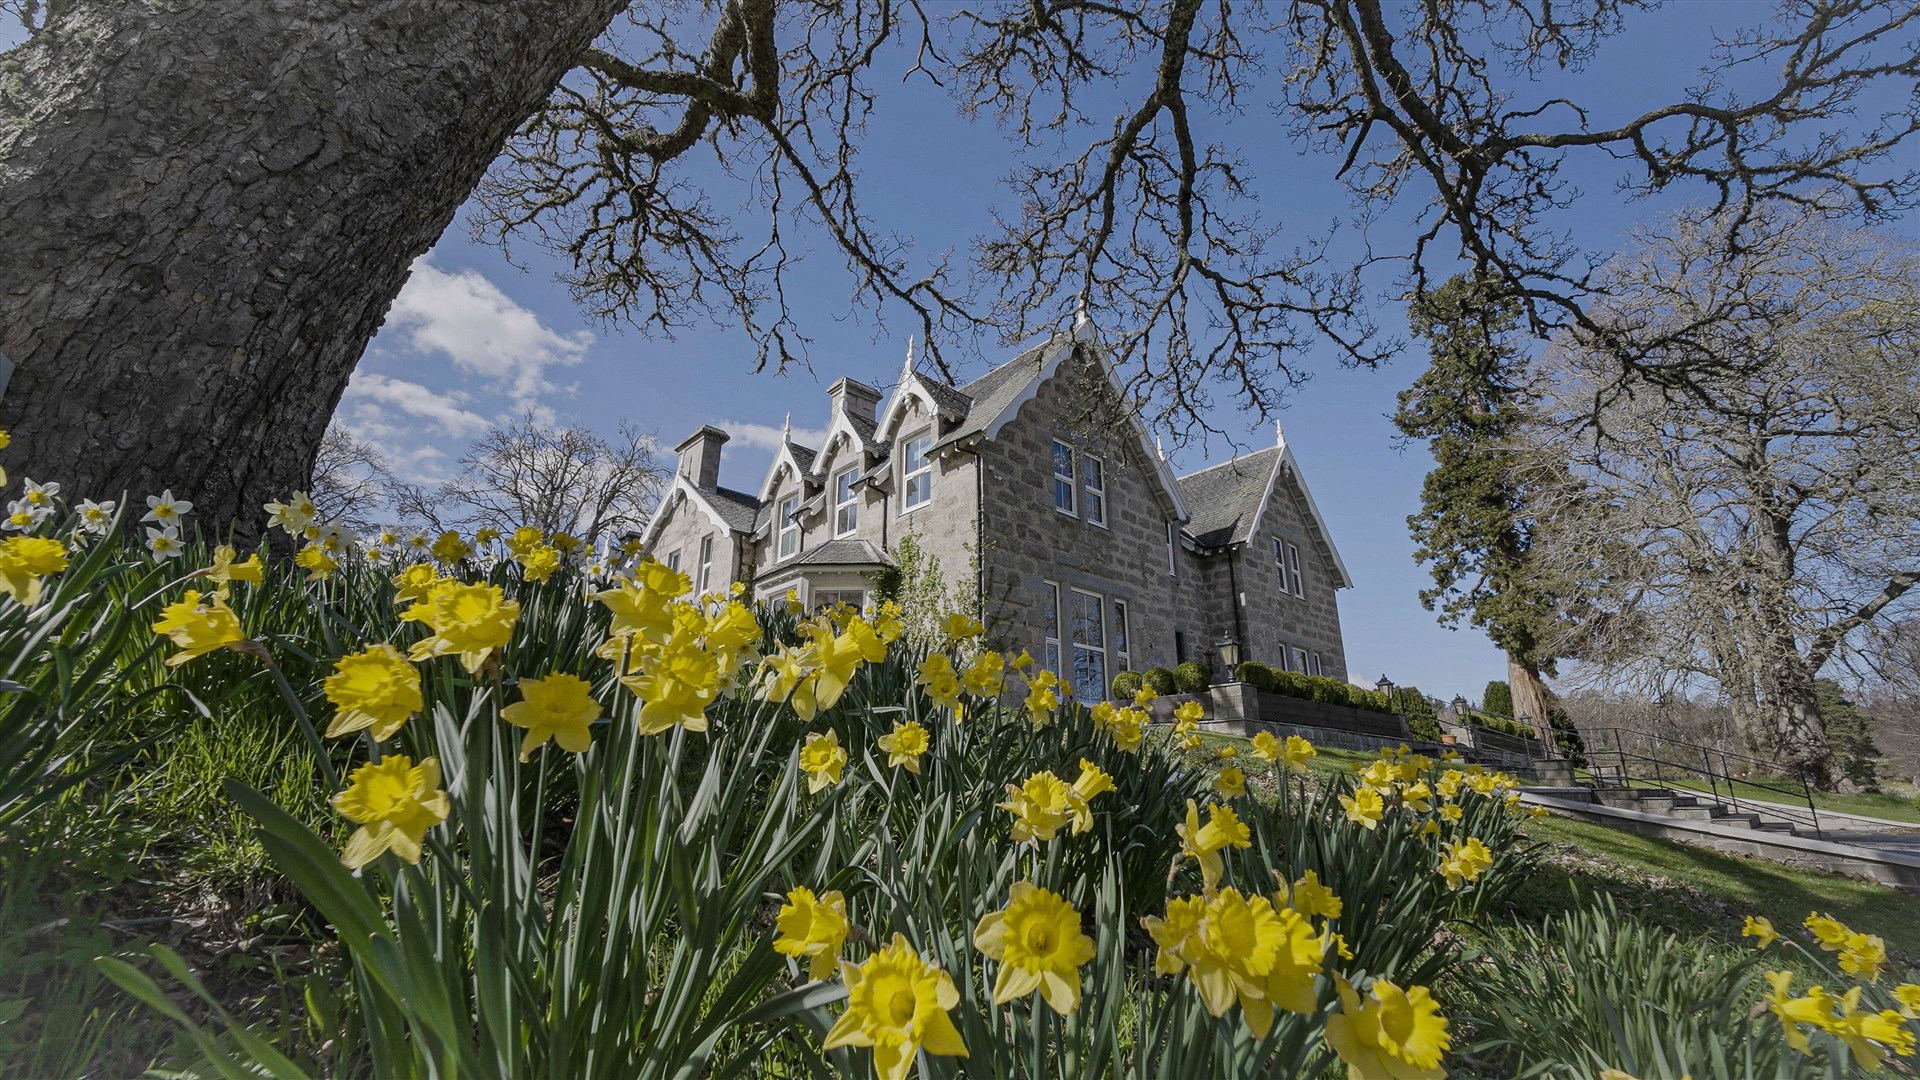 Spring is here for the refurbished Muckrach Country House